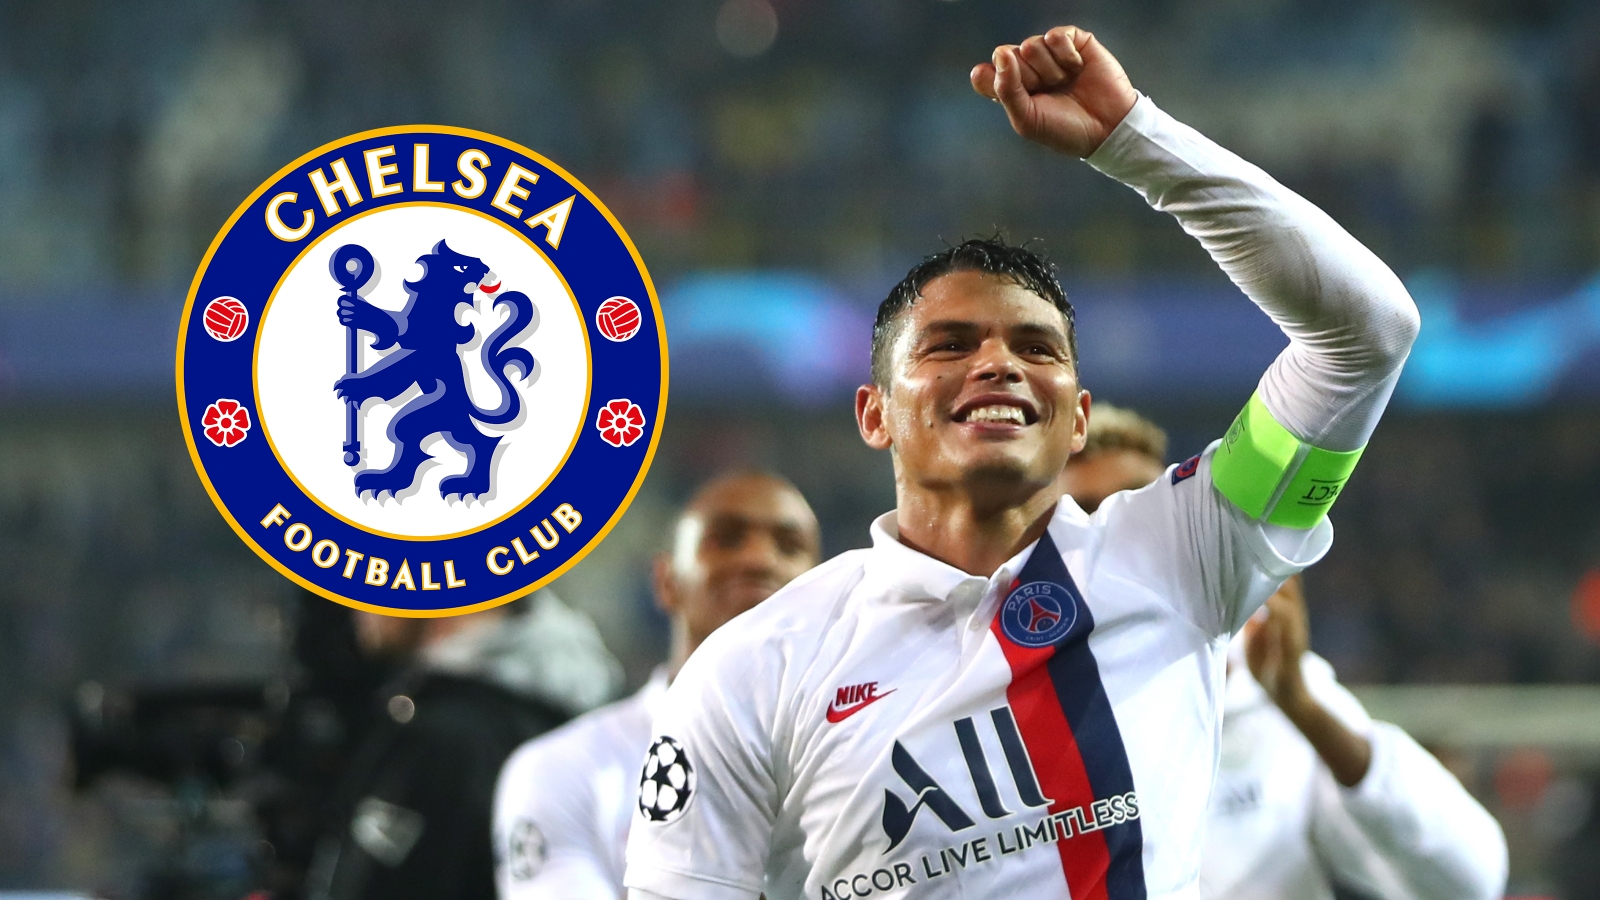 'Thiago Silva will bring experience & leadership to Chelsea' - Giroud backs ex-PSG star to 'adapt very quickly' to the Premier League